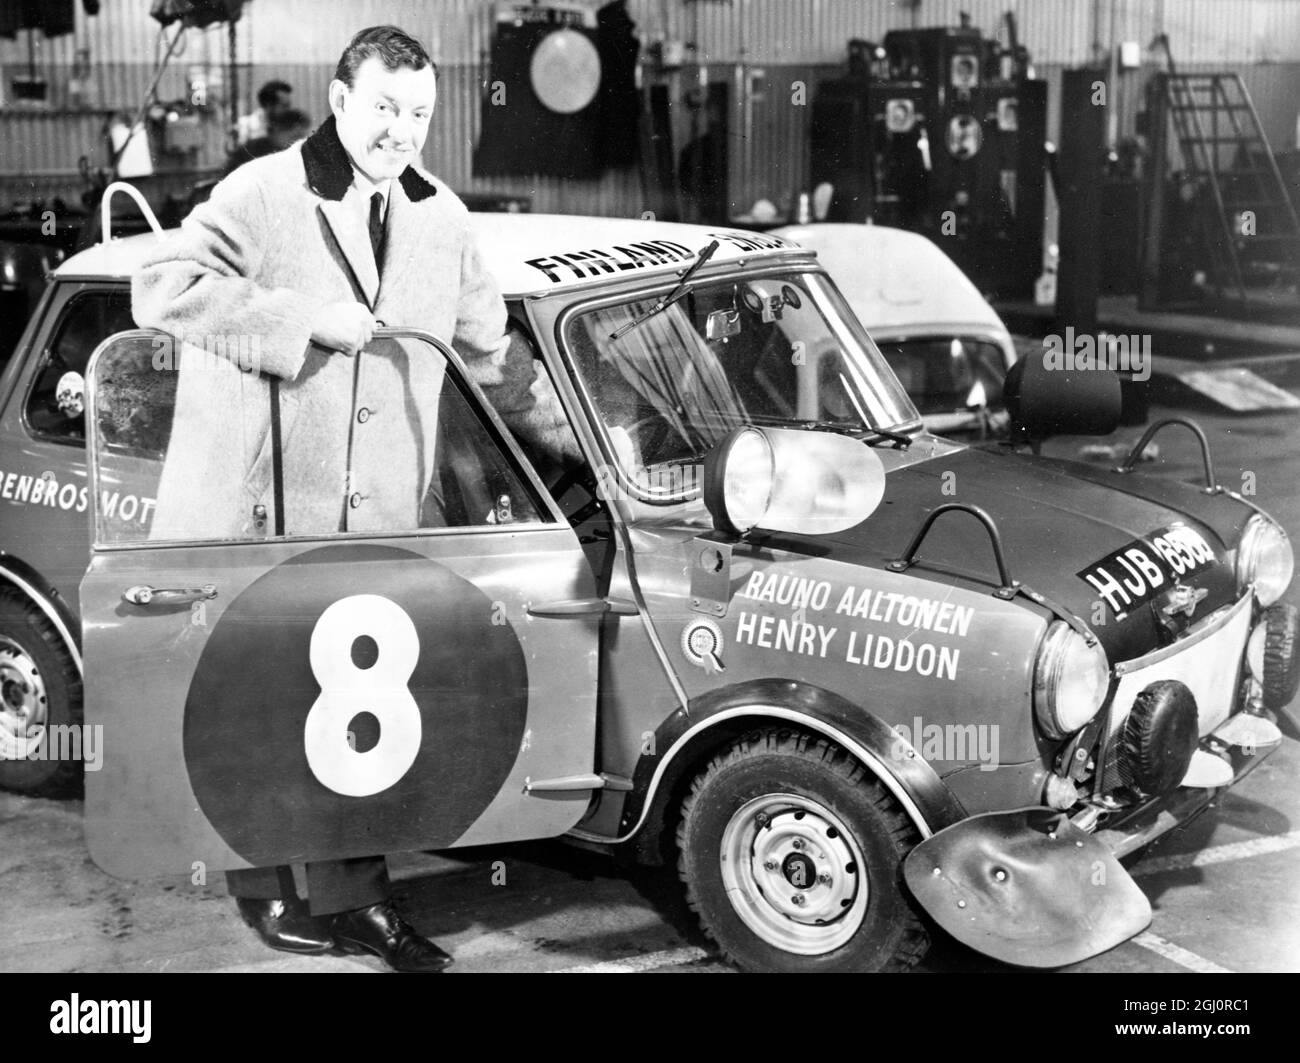 London : Rauno Aaltonen , from Turku , Finland , winner of the 1967 Monte Carlo Rally , with the BMC mini-cooper S he will drive in this East African safari rally , commencing in Kenya on 23 March 1967 . His co-driver will be Henry Liddon who accompanied him on his victorious Monte drive 7 march 1967 Stock Photo